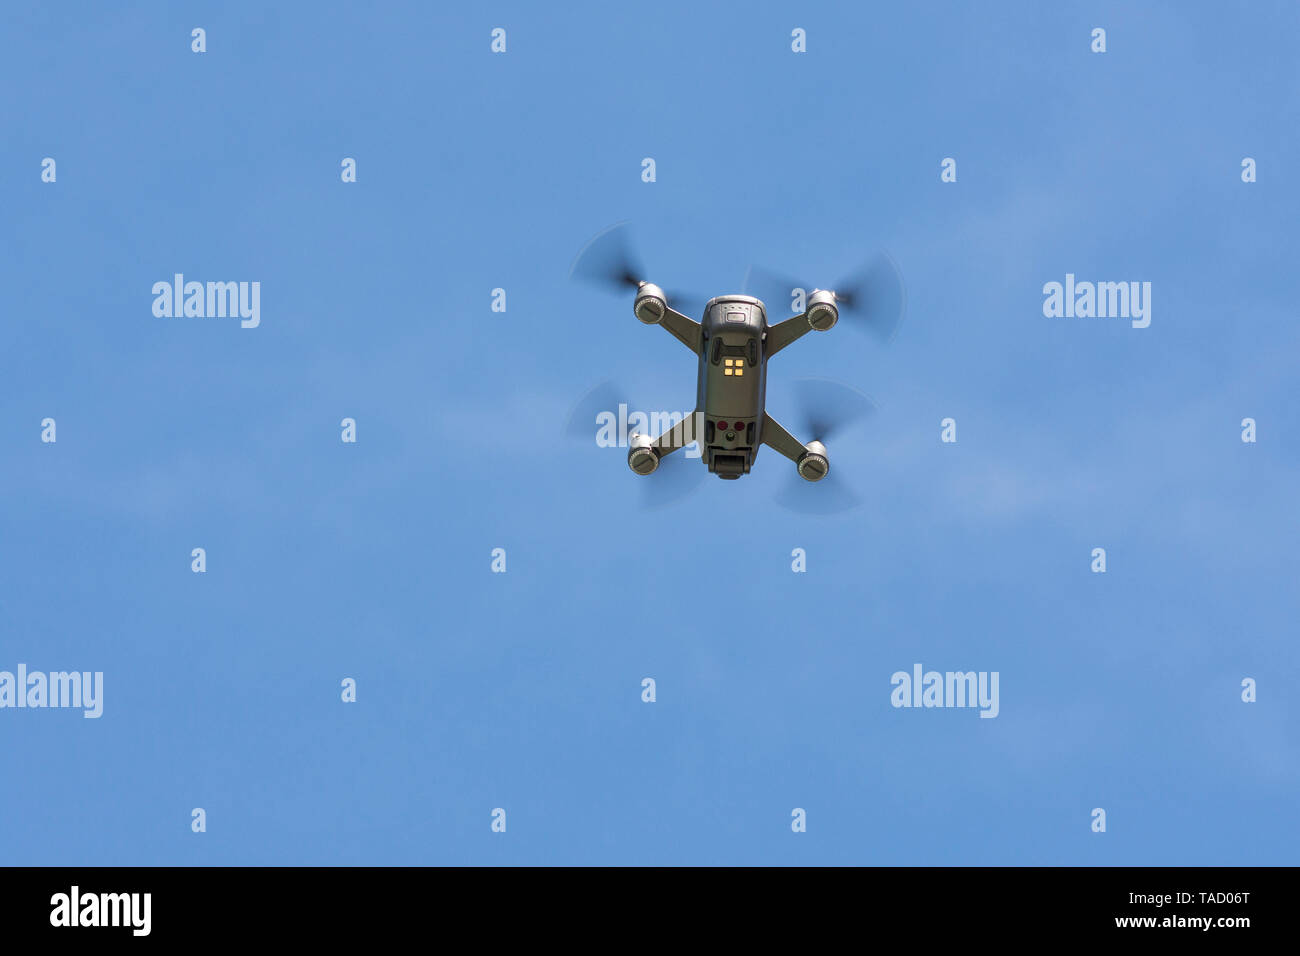 Drone copter, DJI Spark, flying with high resolution digital camera, hovering in sky. Stock Photo